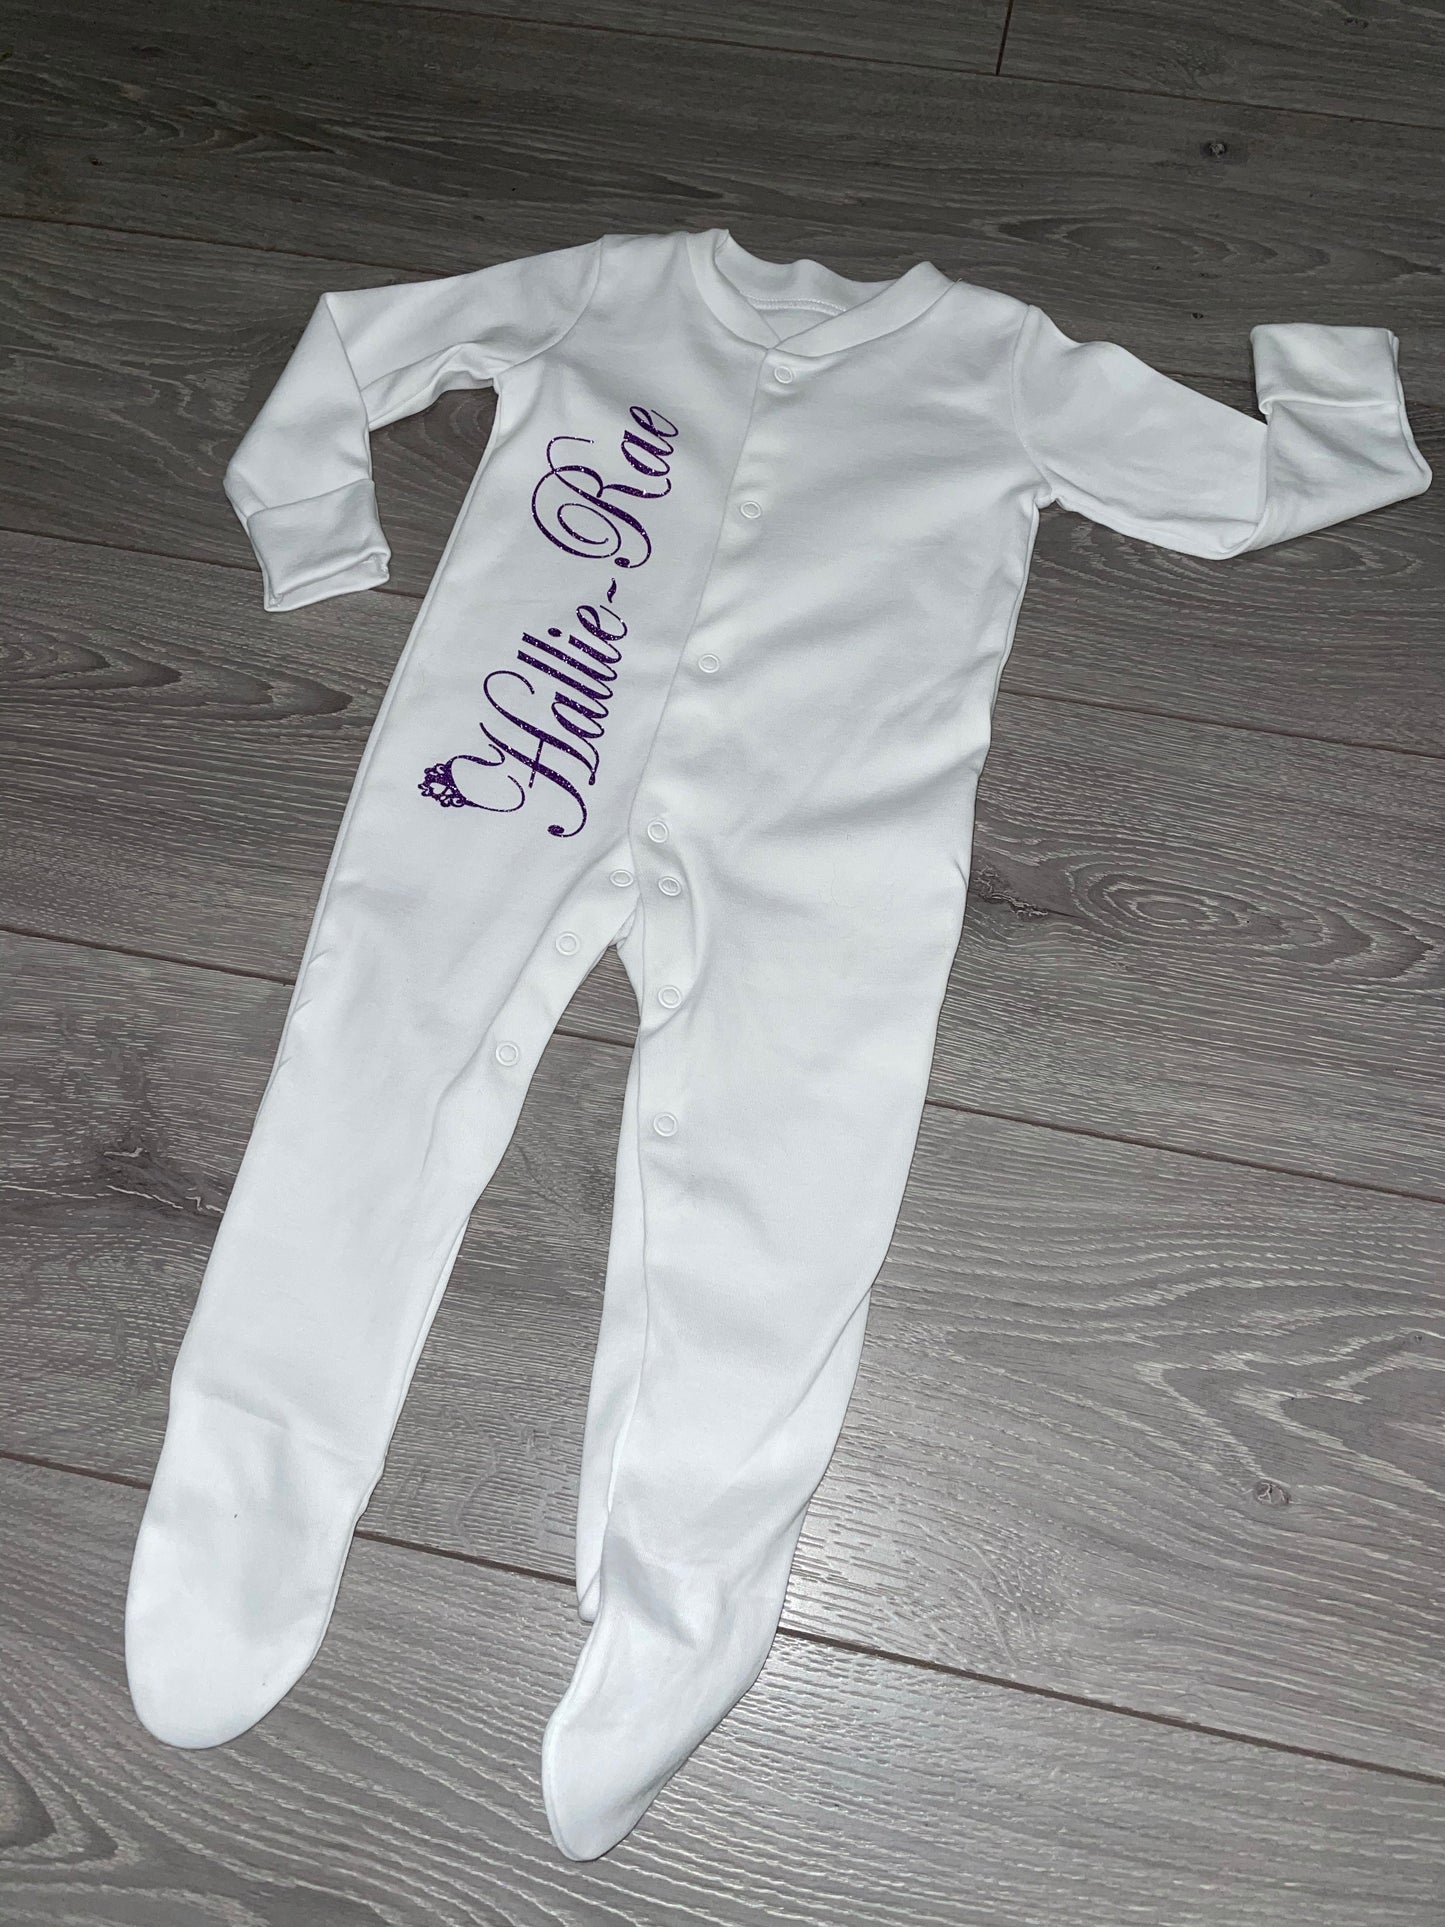 Personalised Side Name Babygrow Sleepsuit Romper - New Baby Gift - 2 for £12